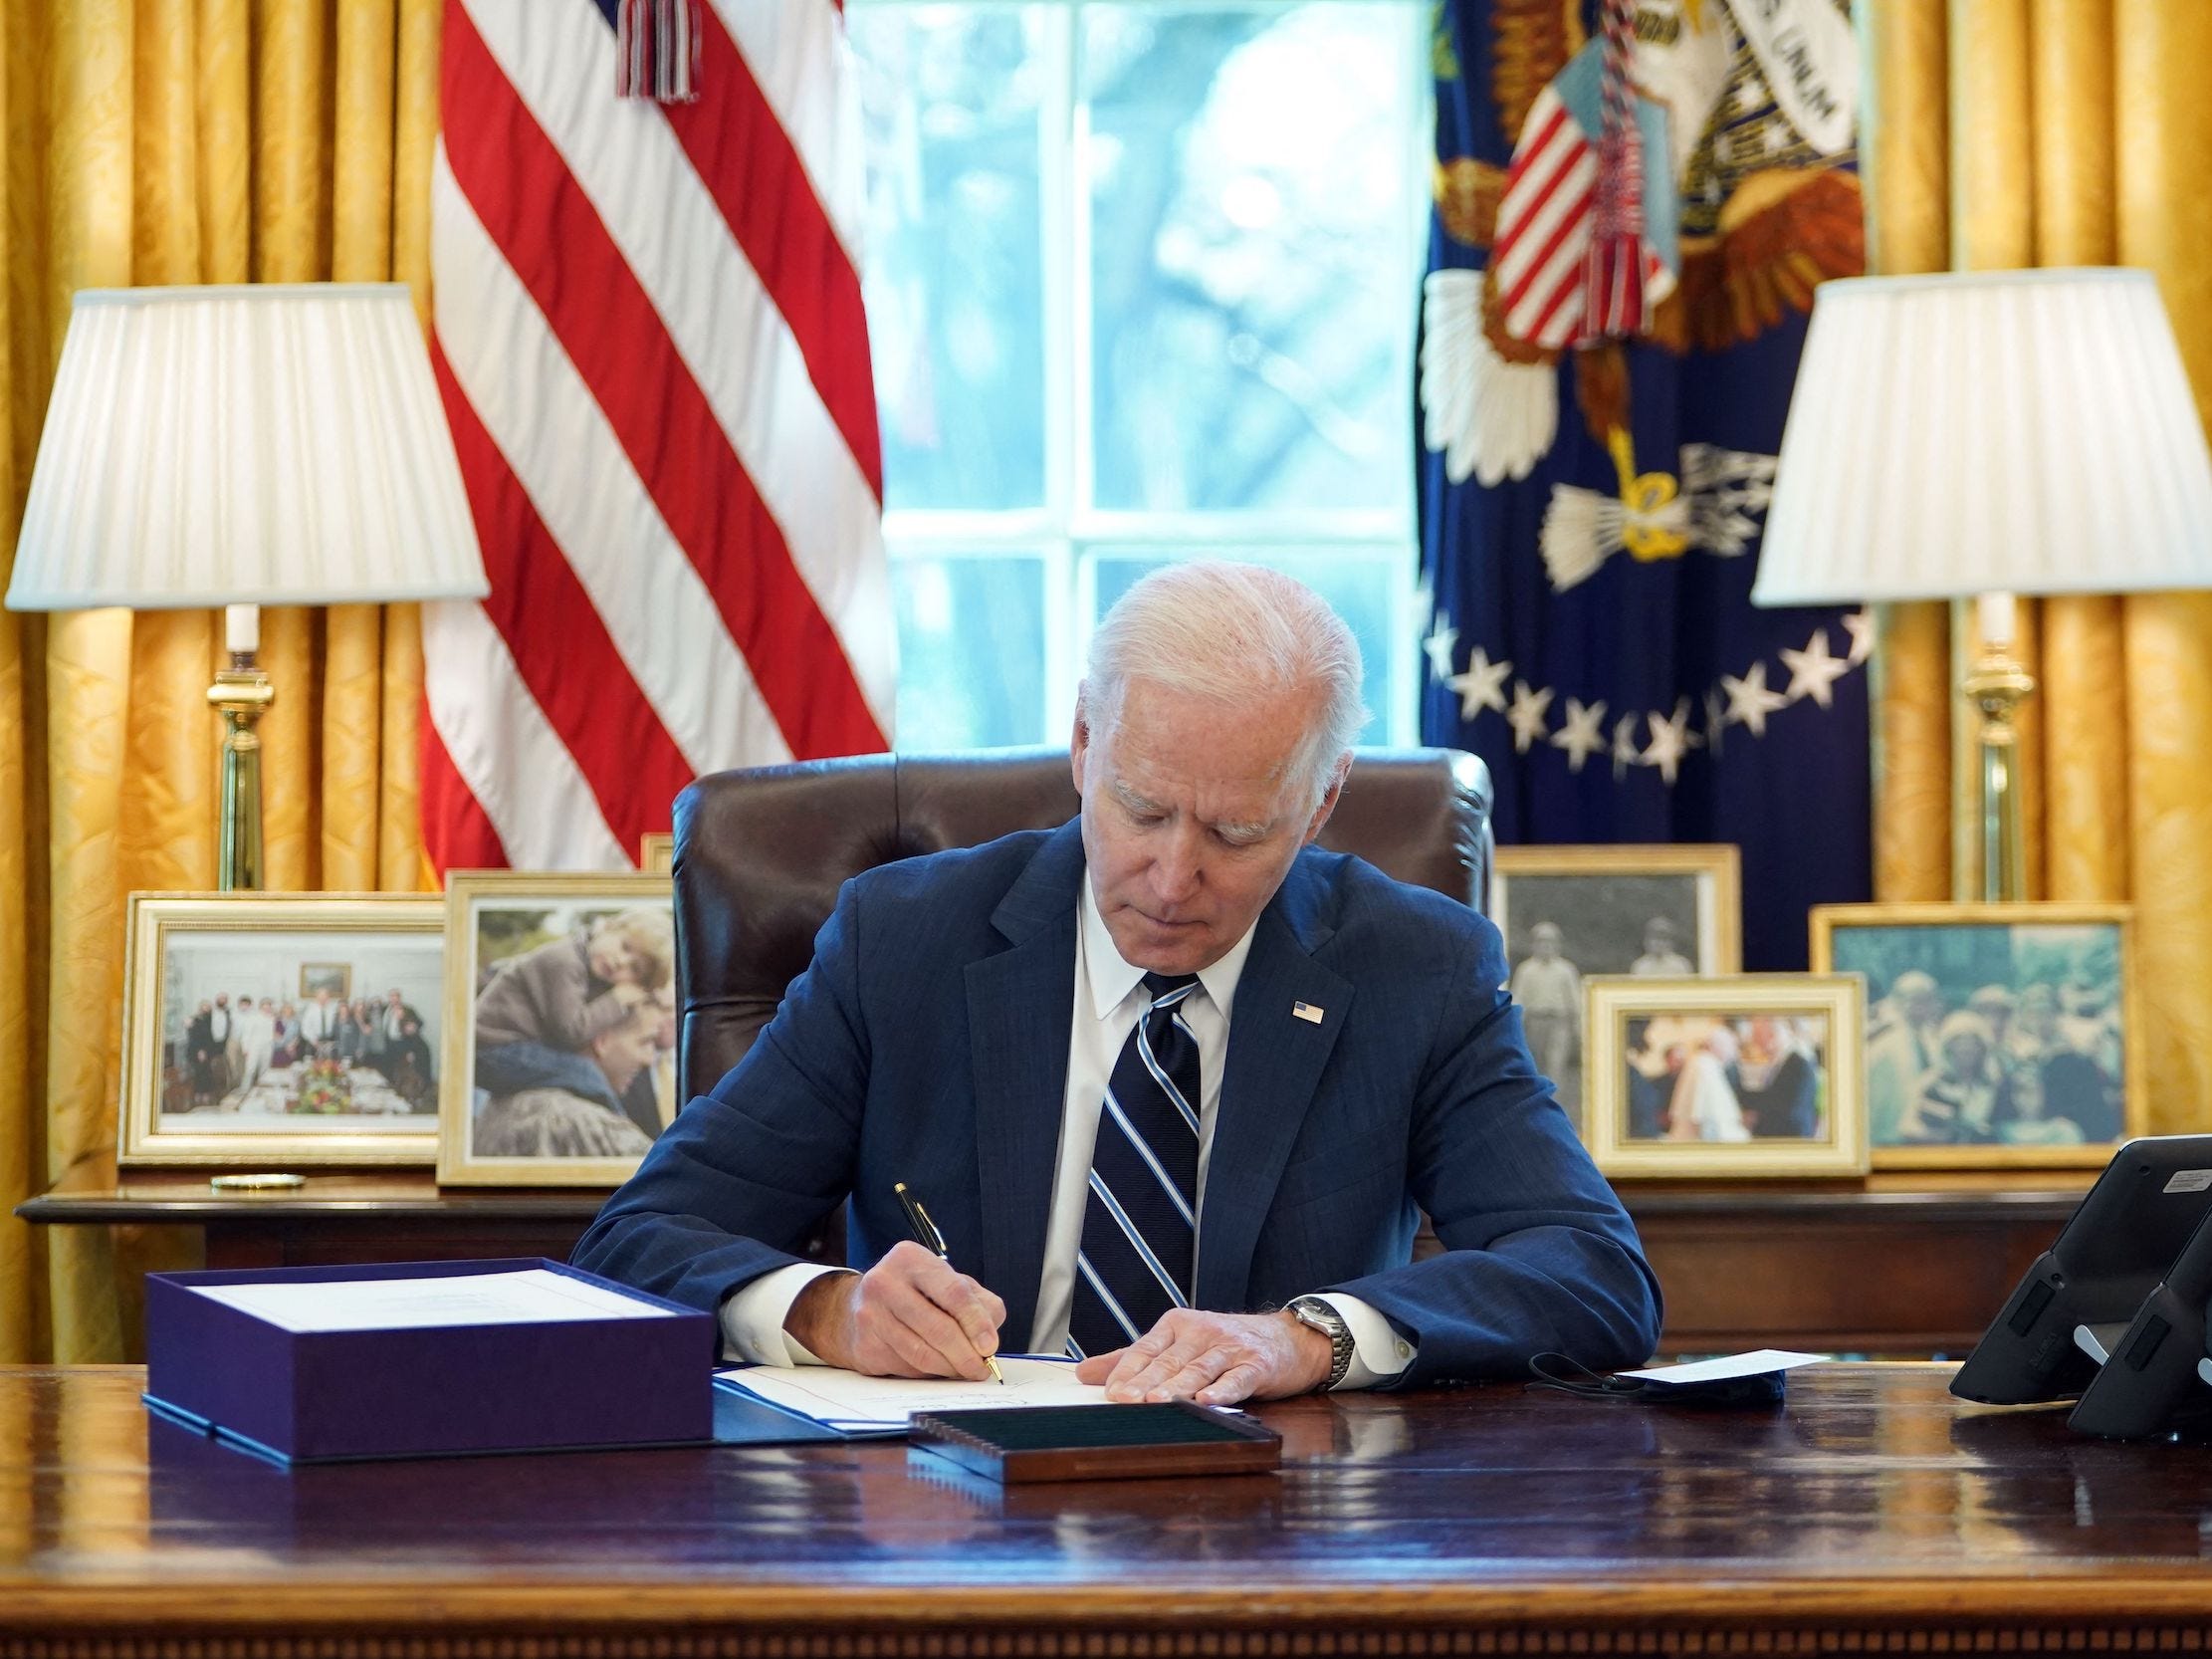 US President Joe Biden signs the American Rescue Plan on March 11, 2021, in the Oval Office of the White House in Washington, DC.